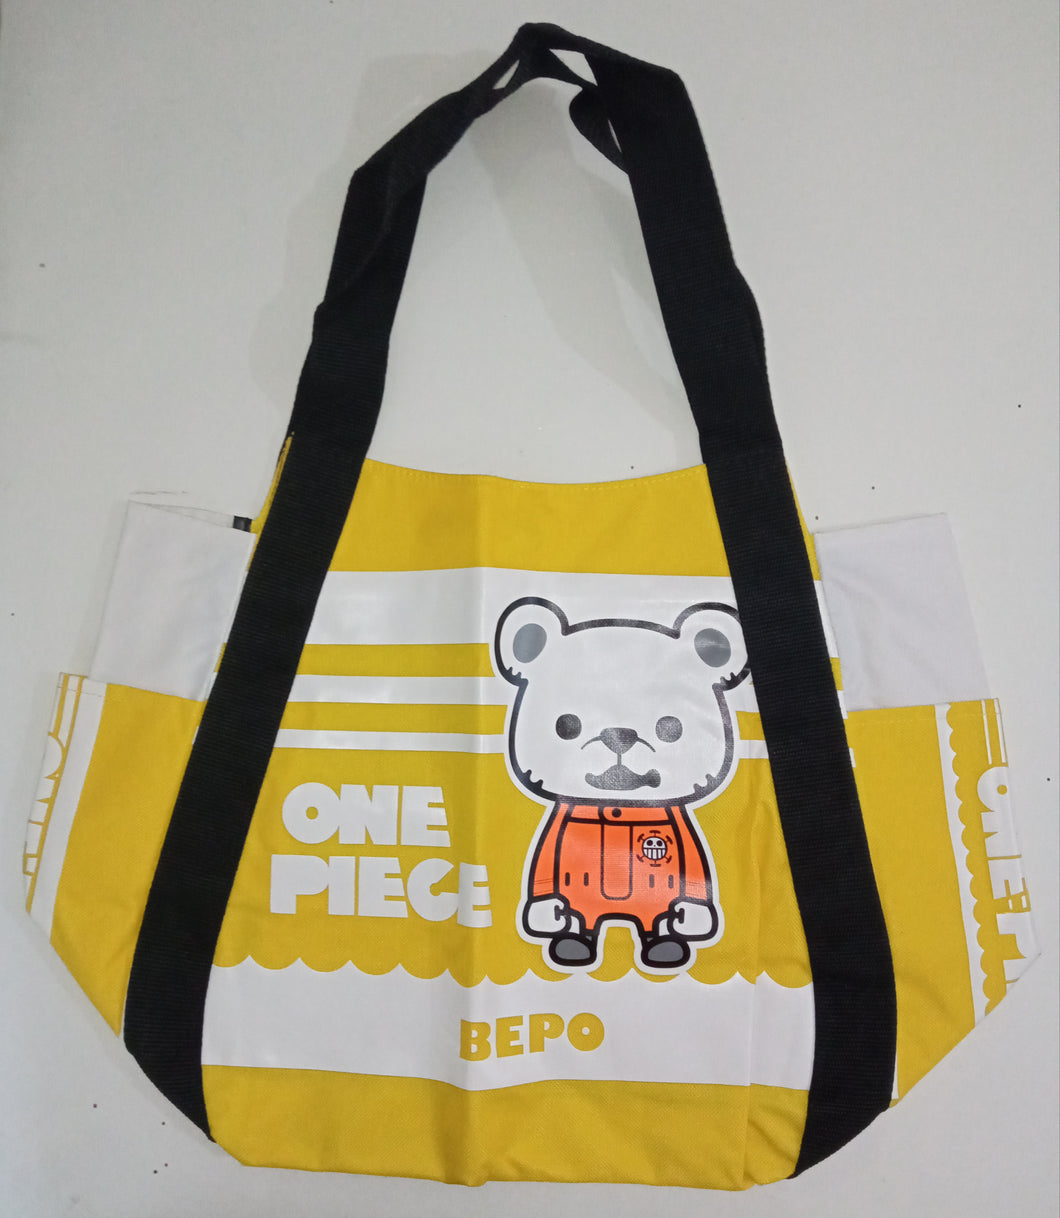 One Piece x Panson Works Balloon Tote Bag (Bepo)